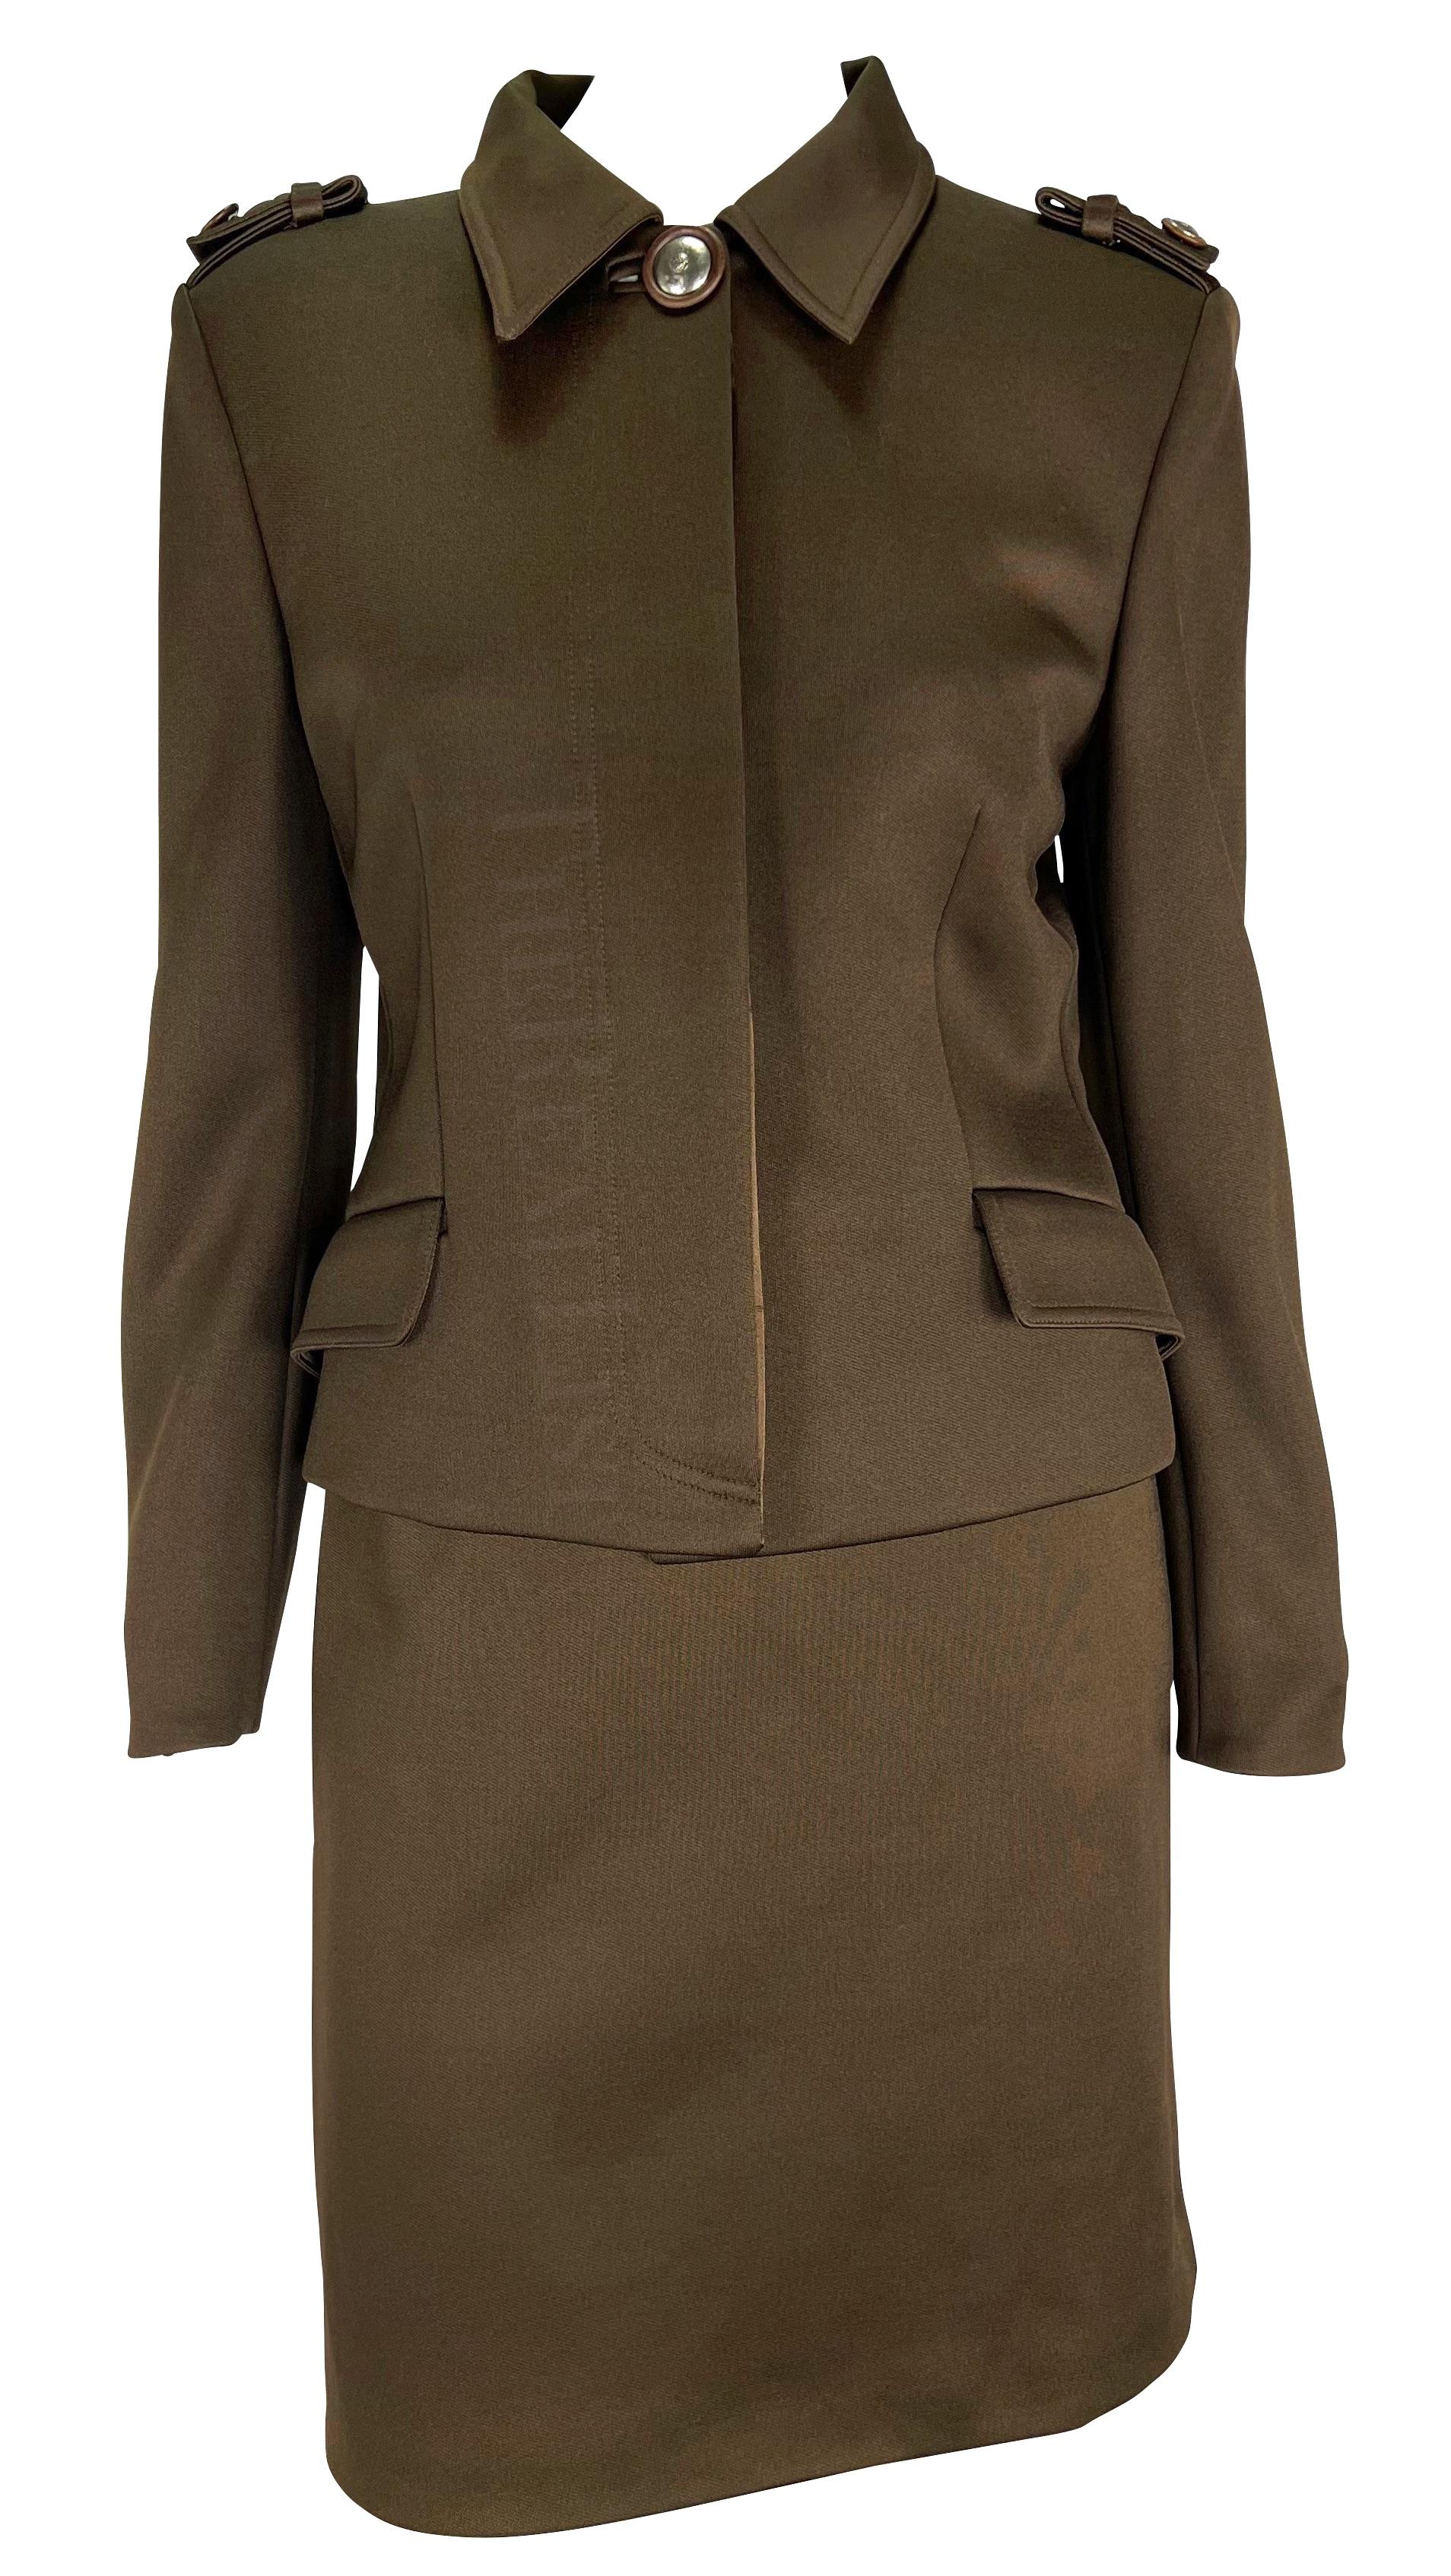 F/W 1996 Gianni Versace Brown Military-Inspired Medusa Button Skirt Suit Set  For Sale 1